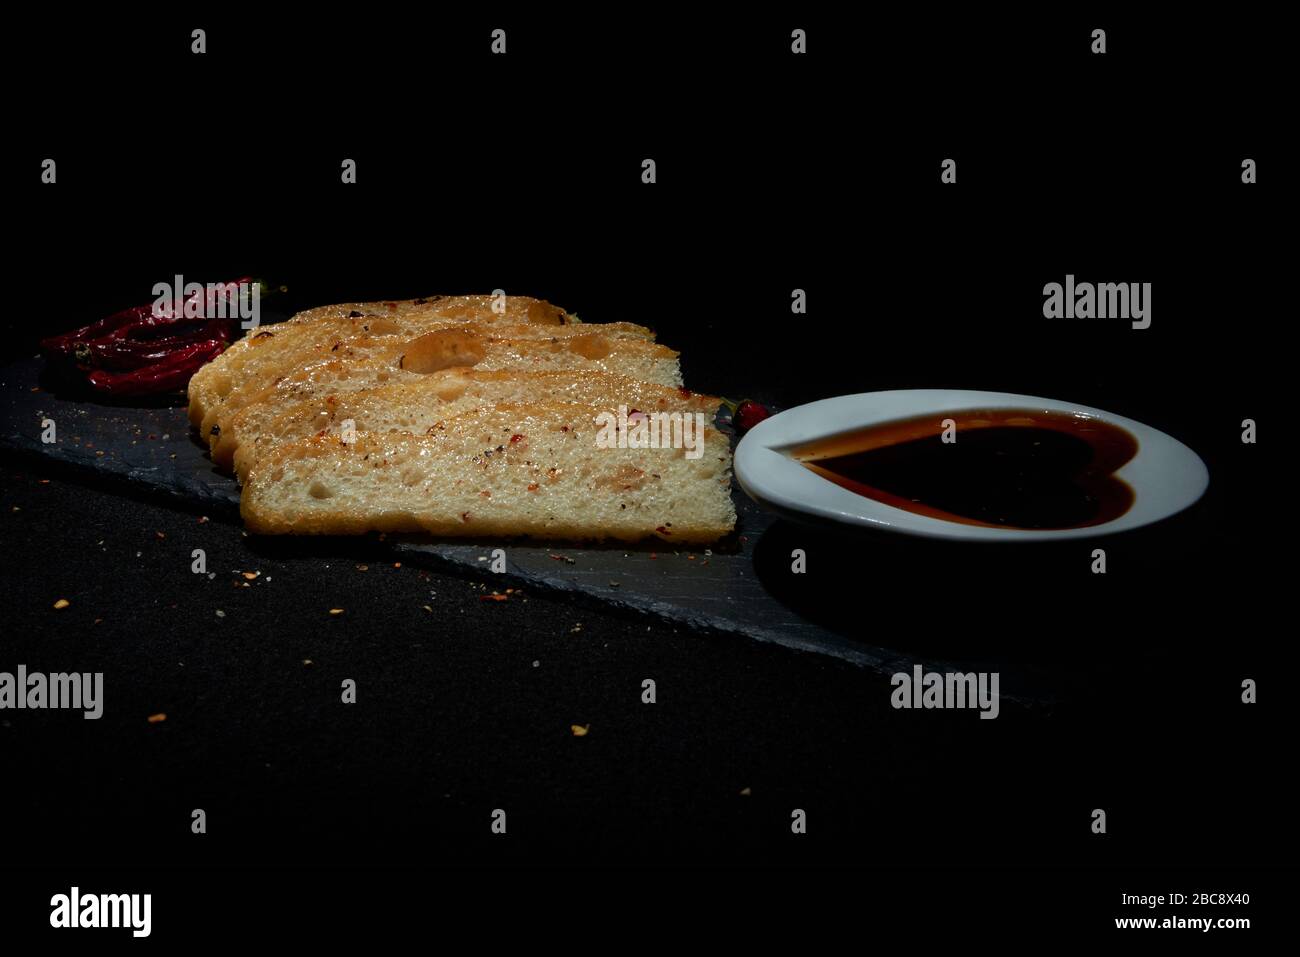 Display of homemade Italian style Focaccia bread with red chillies.  Sliced bread on black slate with balsamic vinegar in heart shape dish a Stock Photo